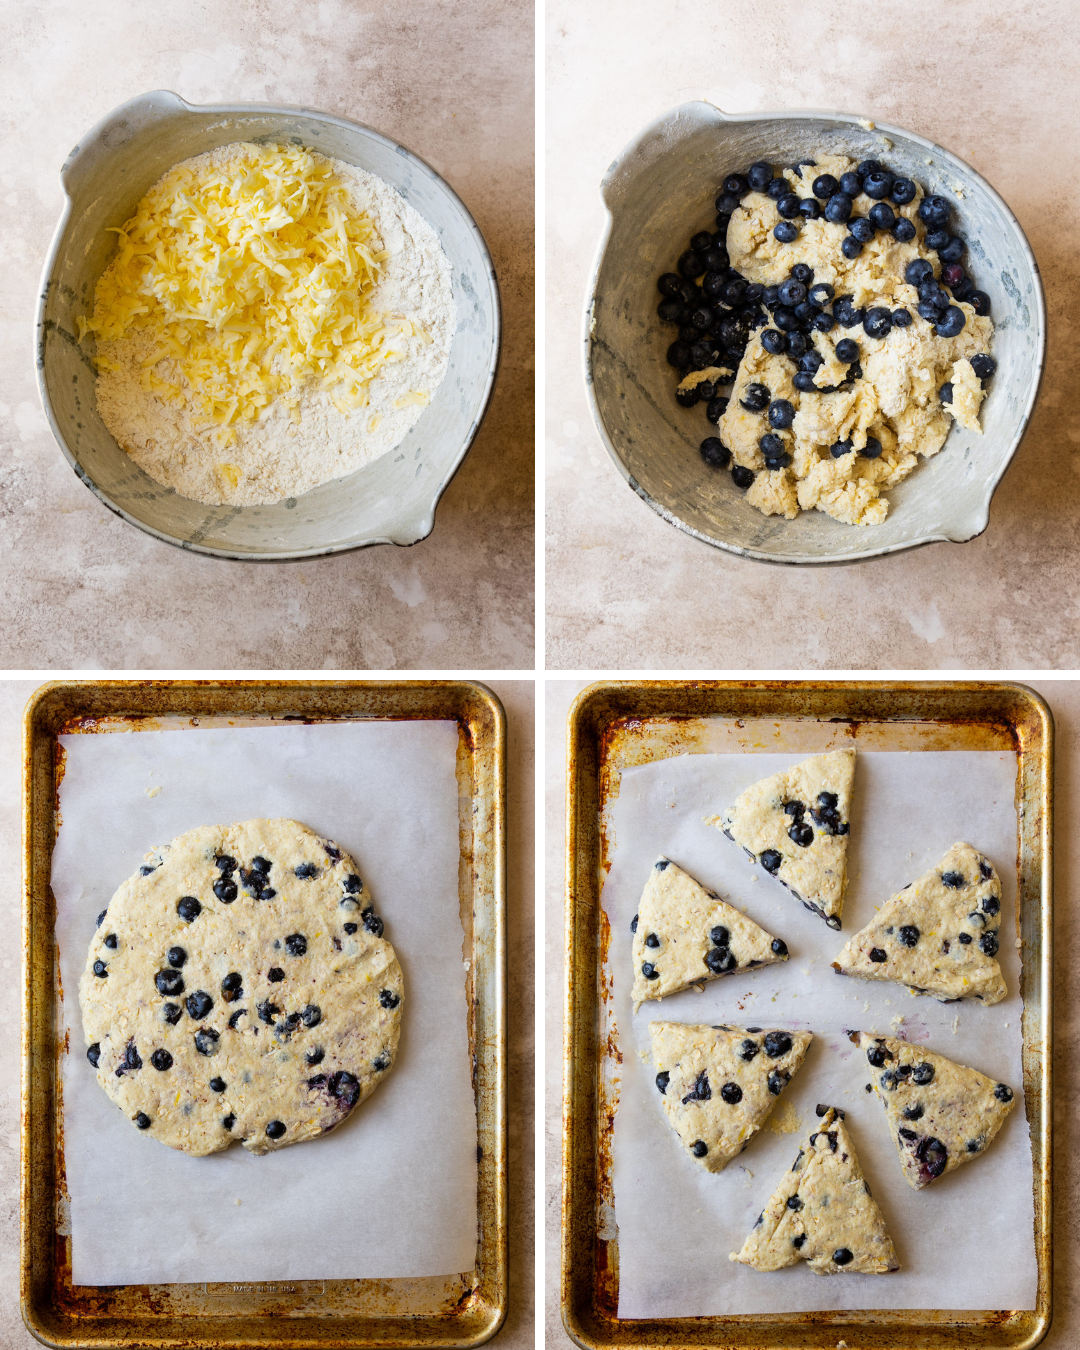 Step by step assembly of lemon blueberry scones